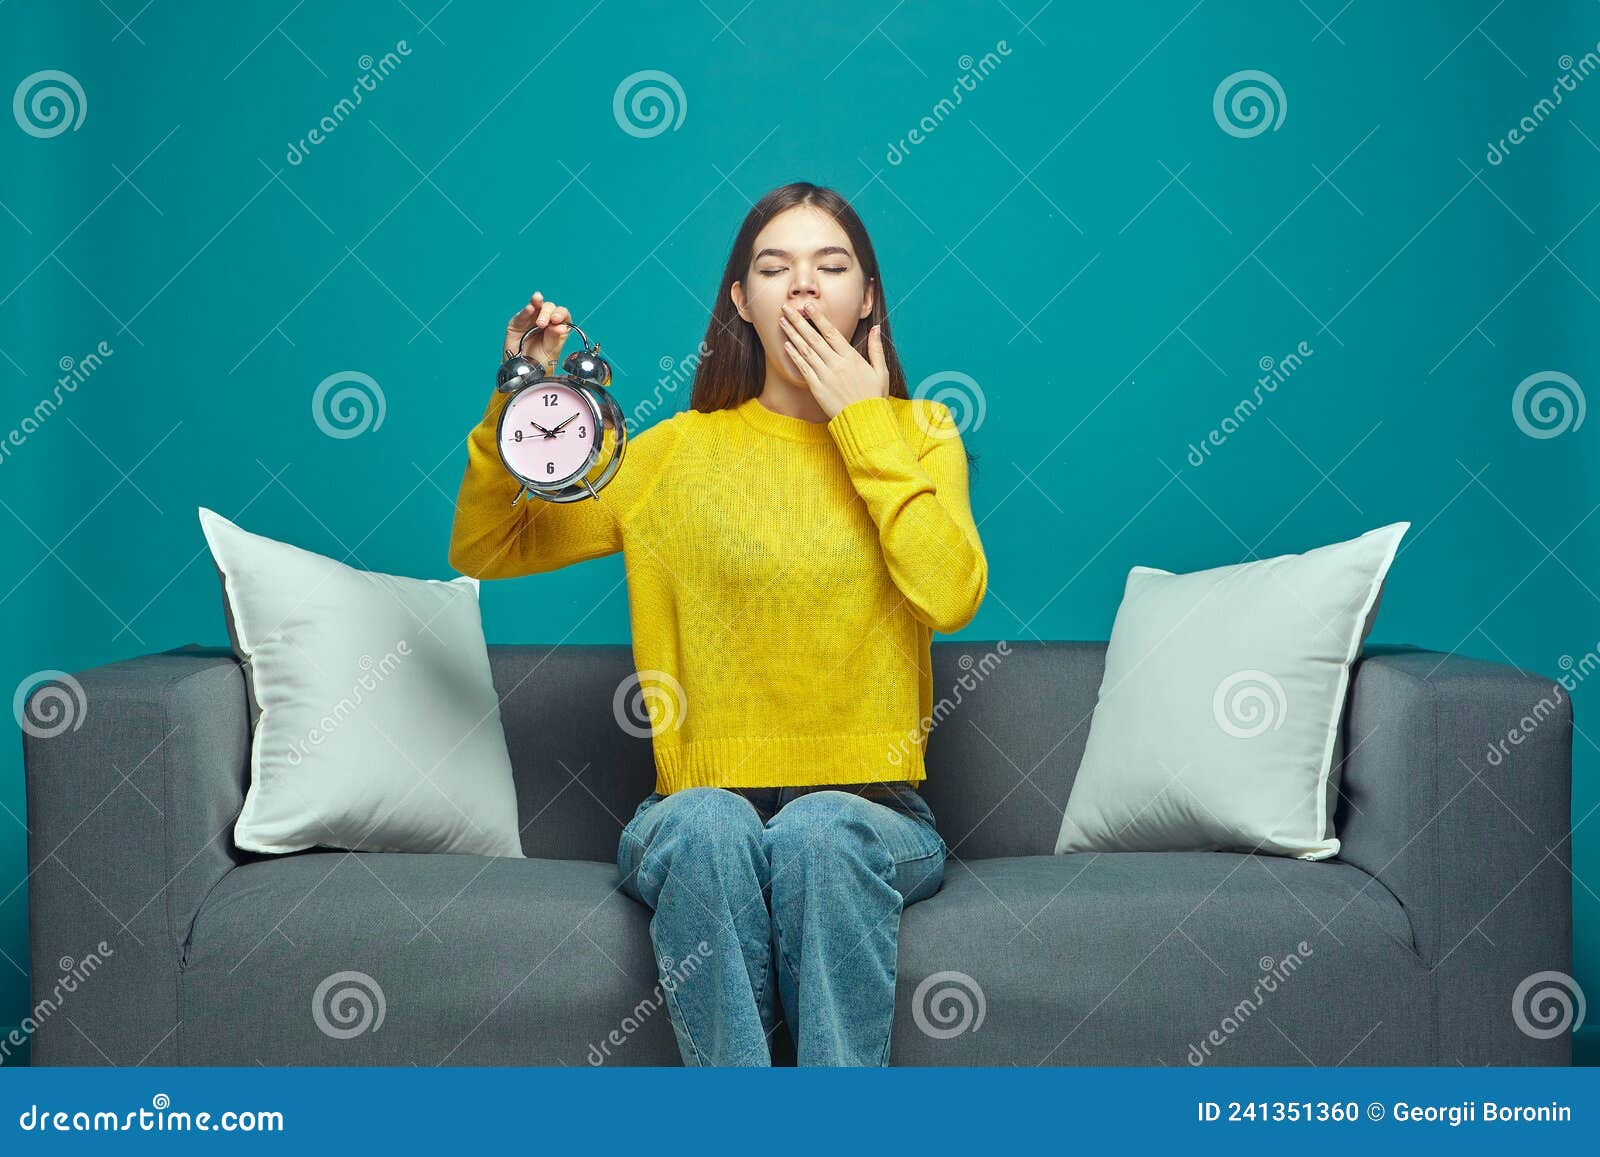 Sleepy Young Girl Yawn Covering Mouth By Hand Holding Alarm Clock